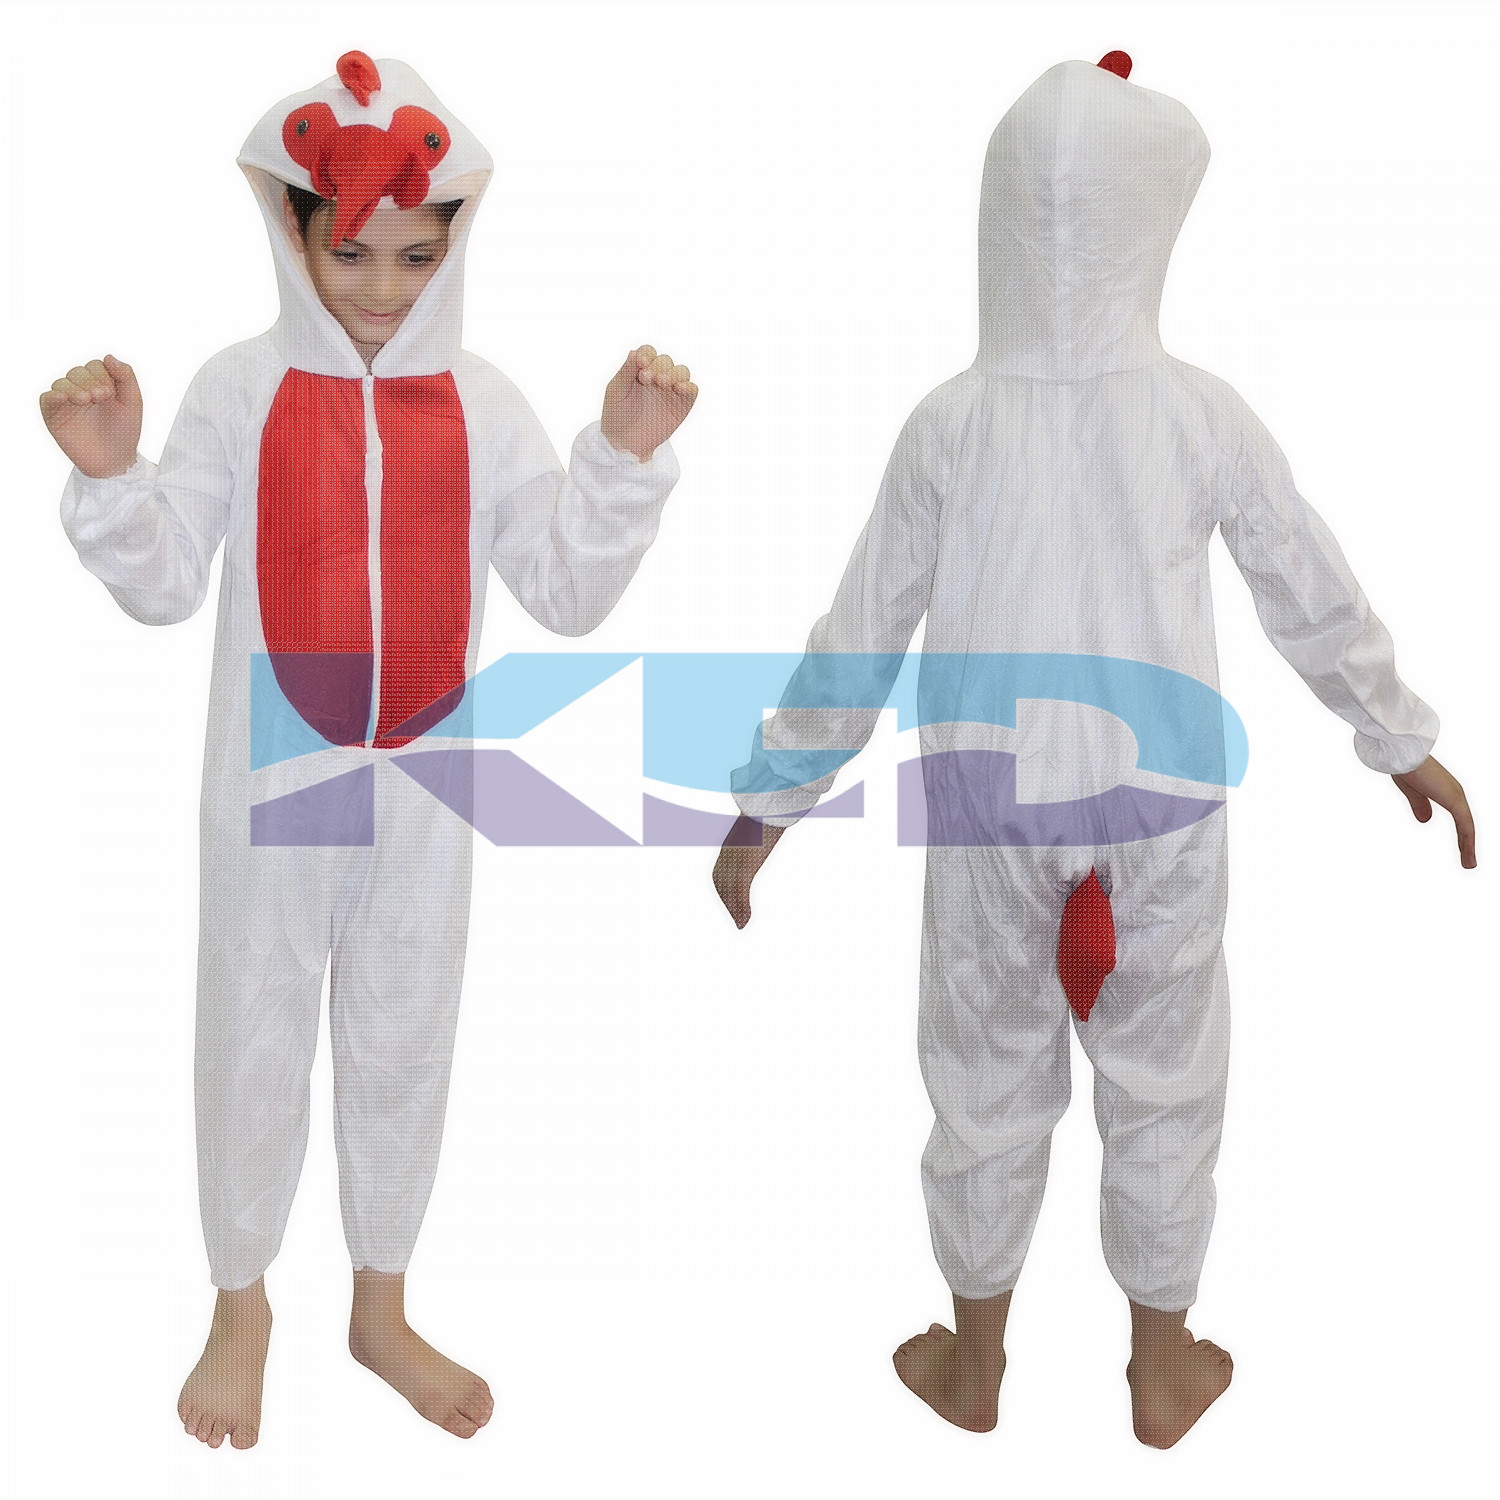 Cock fancy dress for kids,Bird Costume for School Annual function/Theme Party/Competition/Stage Shows Dress